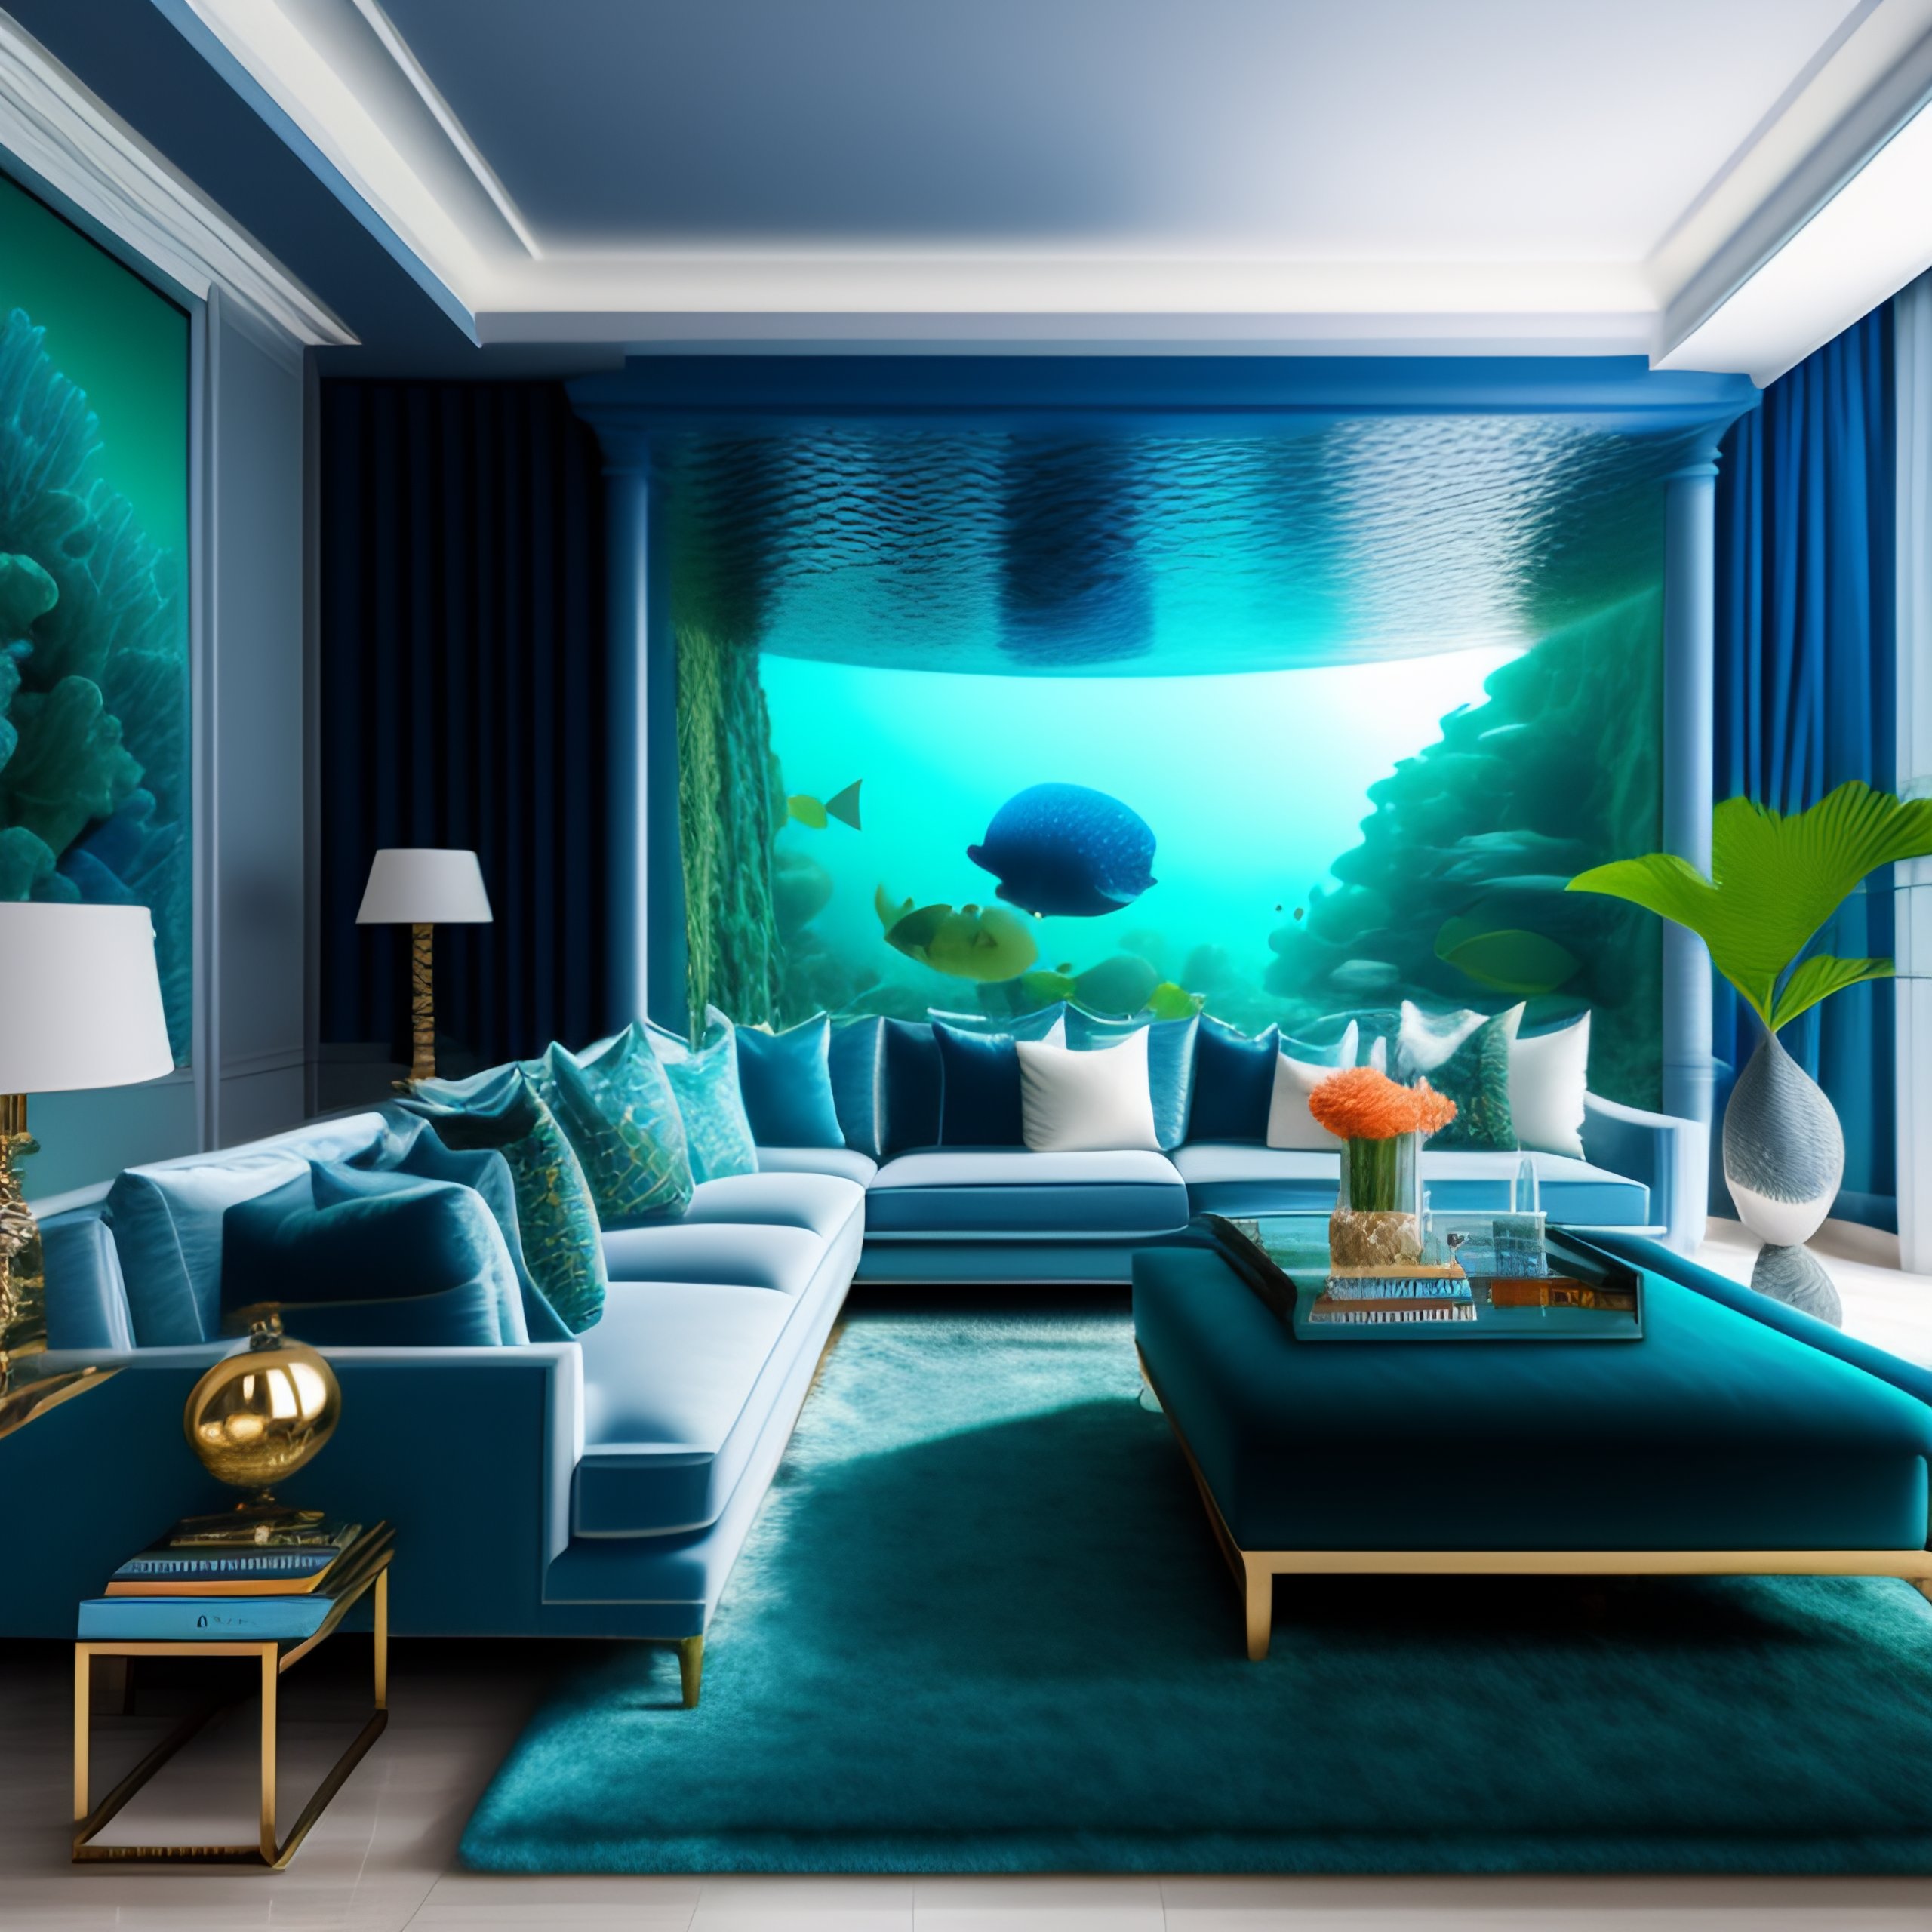 Lexica - A fantastical living room with an underwater theme, featuring  shades of blue and green for the walls, furniture, and accessories, as well